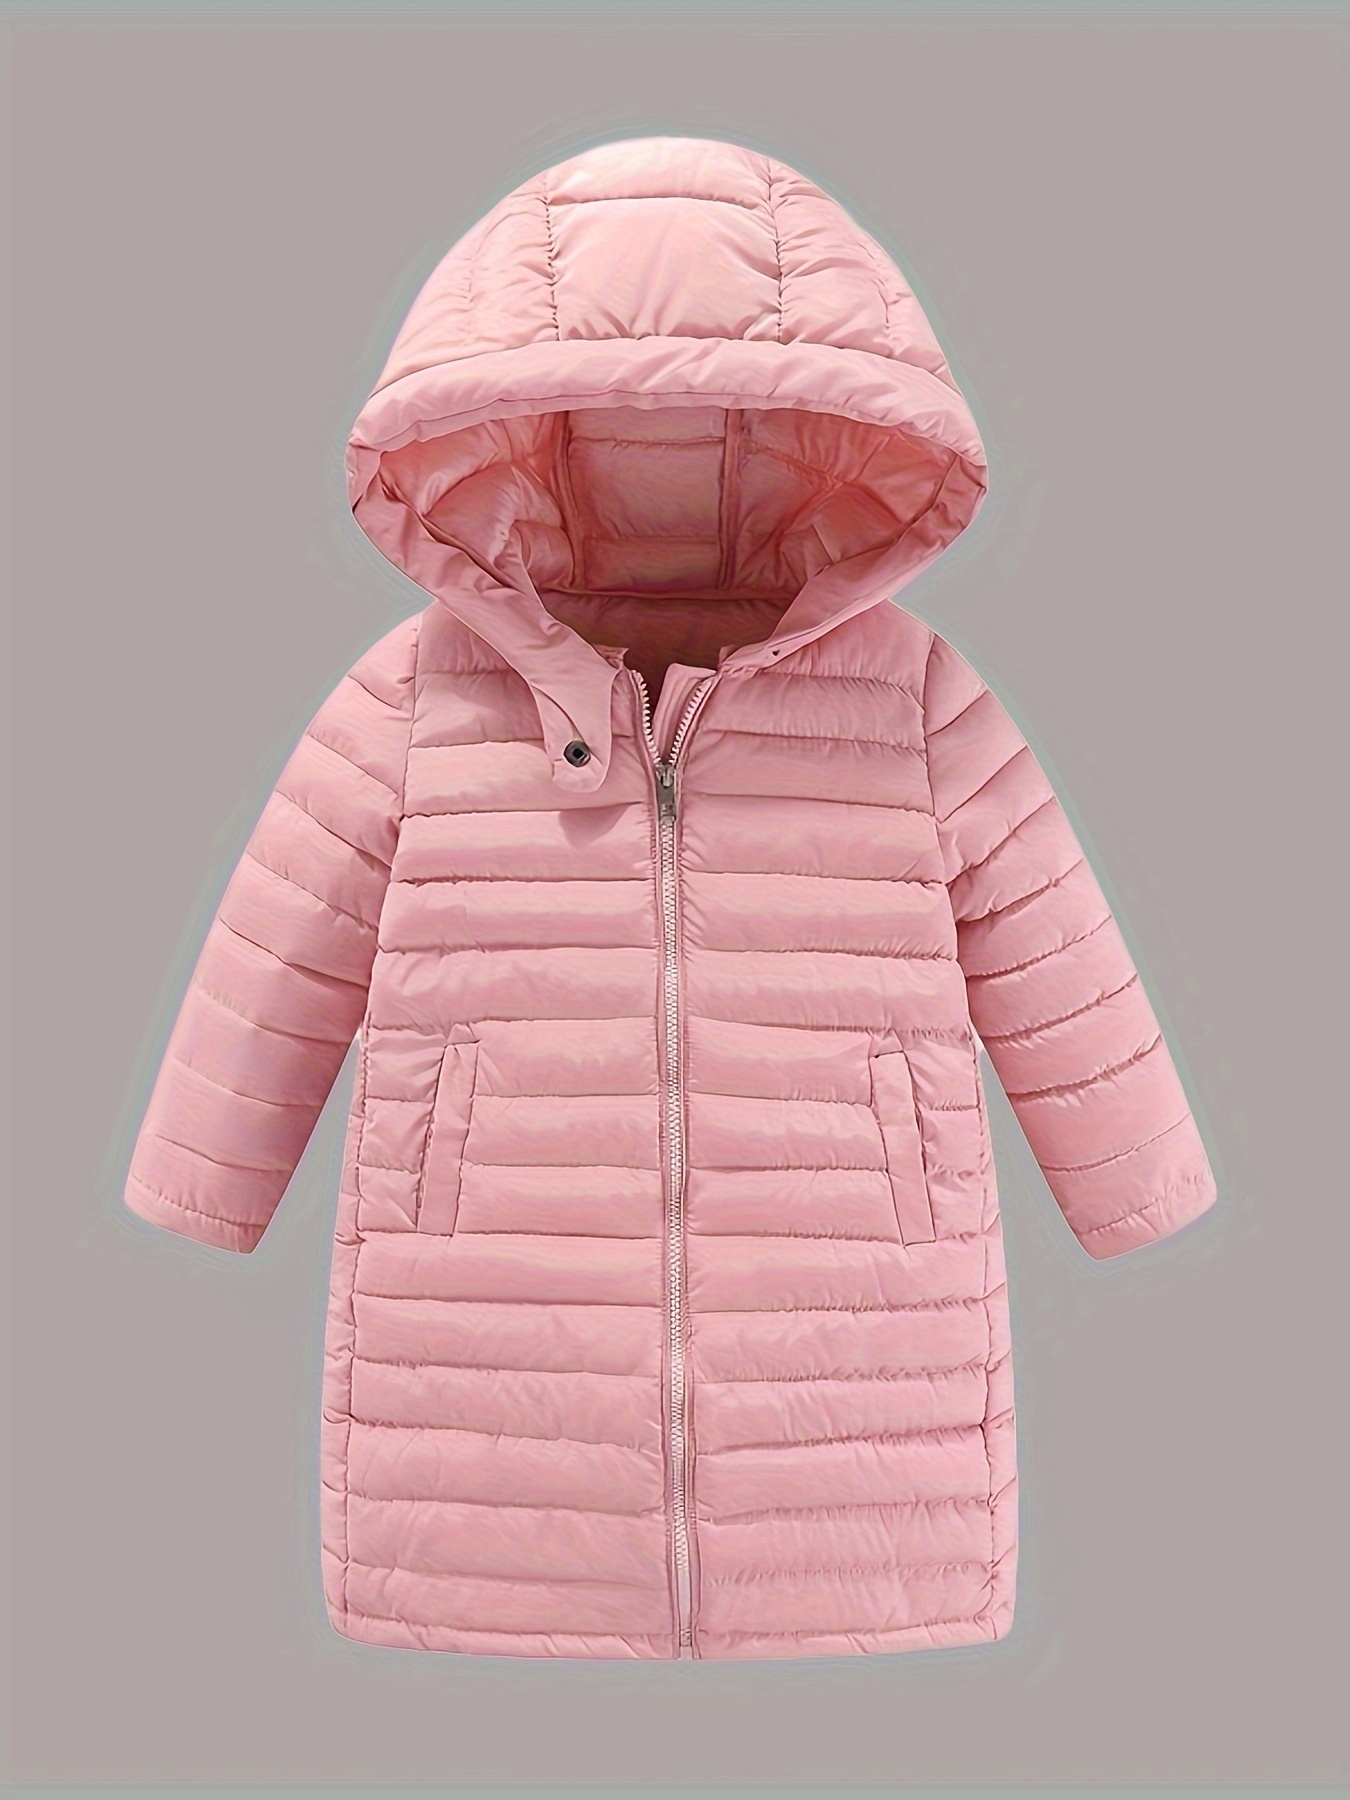 Winter Girls' Solid Basic Warm Cotton-padded Jacket Windproof Outdoor Snow  Suits, Children's Overcoats